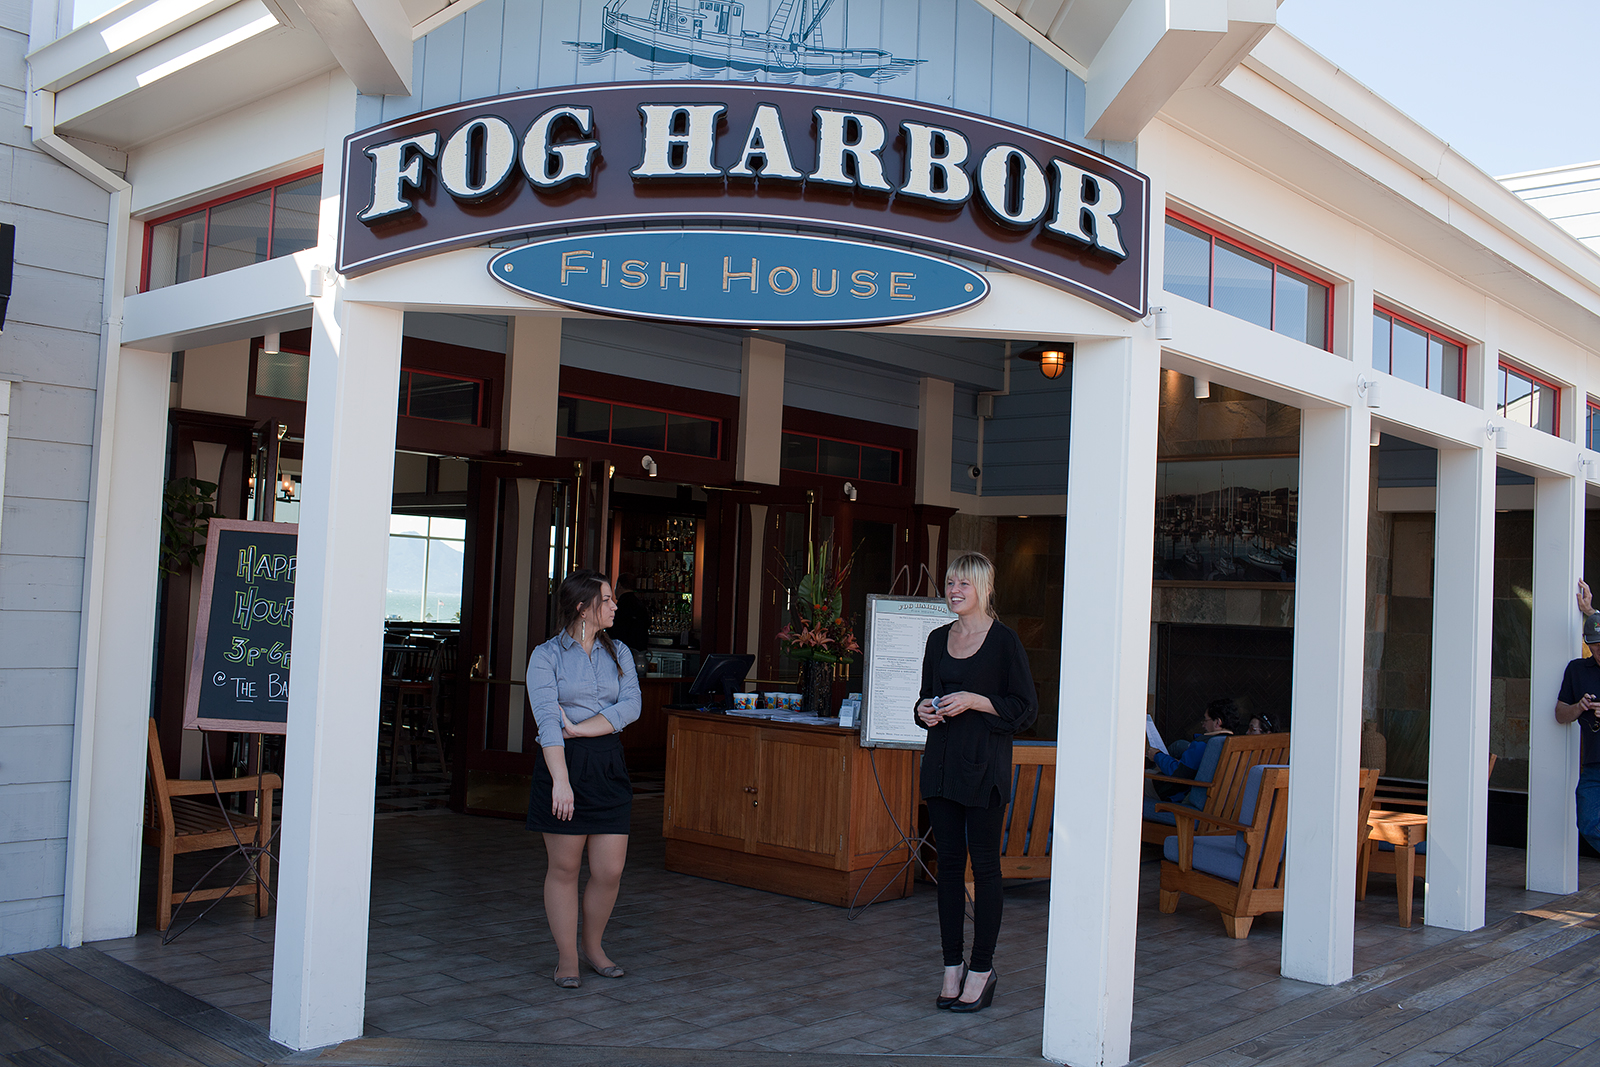 Fog Harbor Fish House Restaurant Info and Reservations